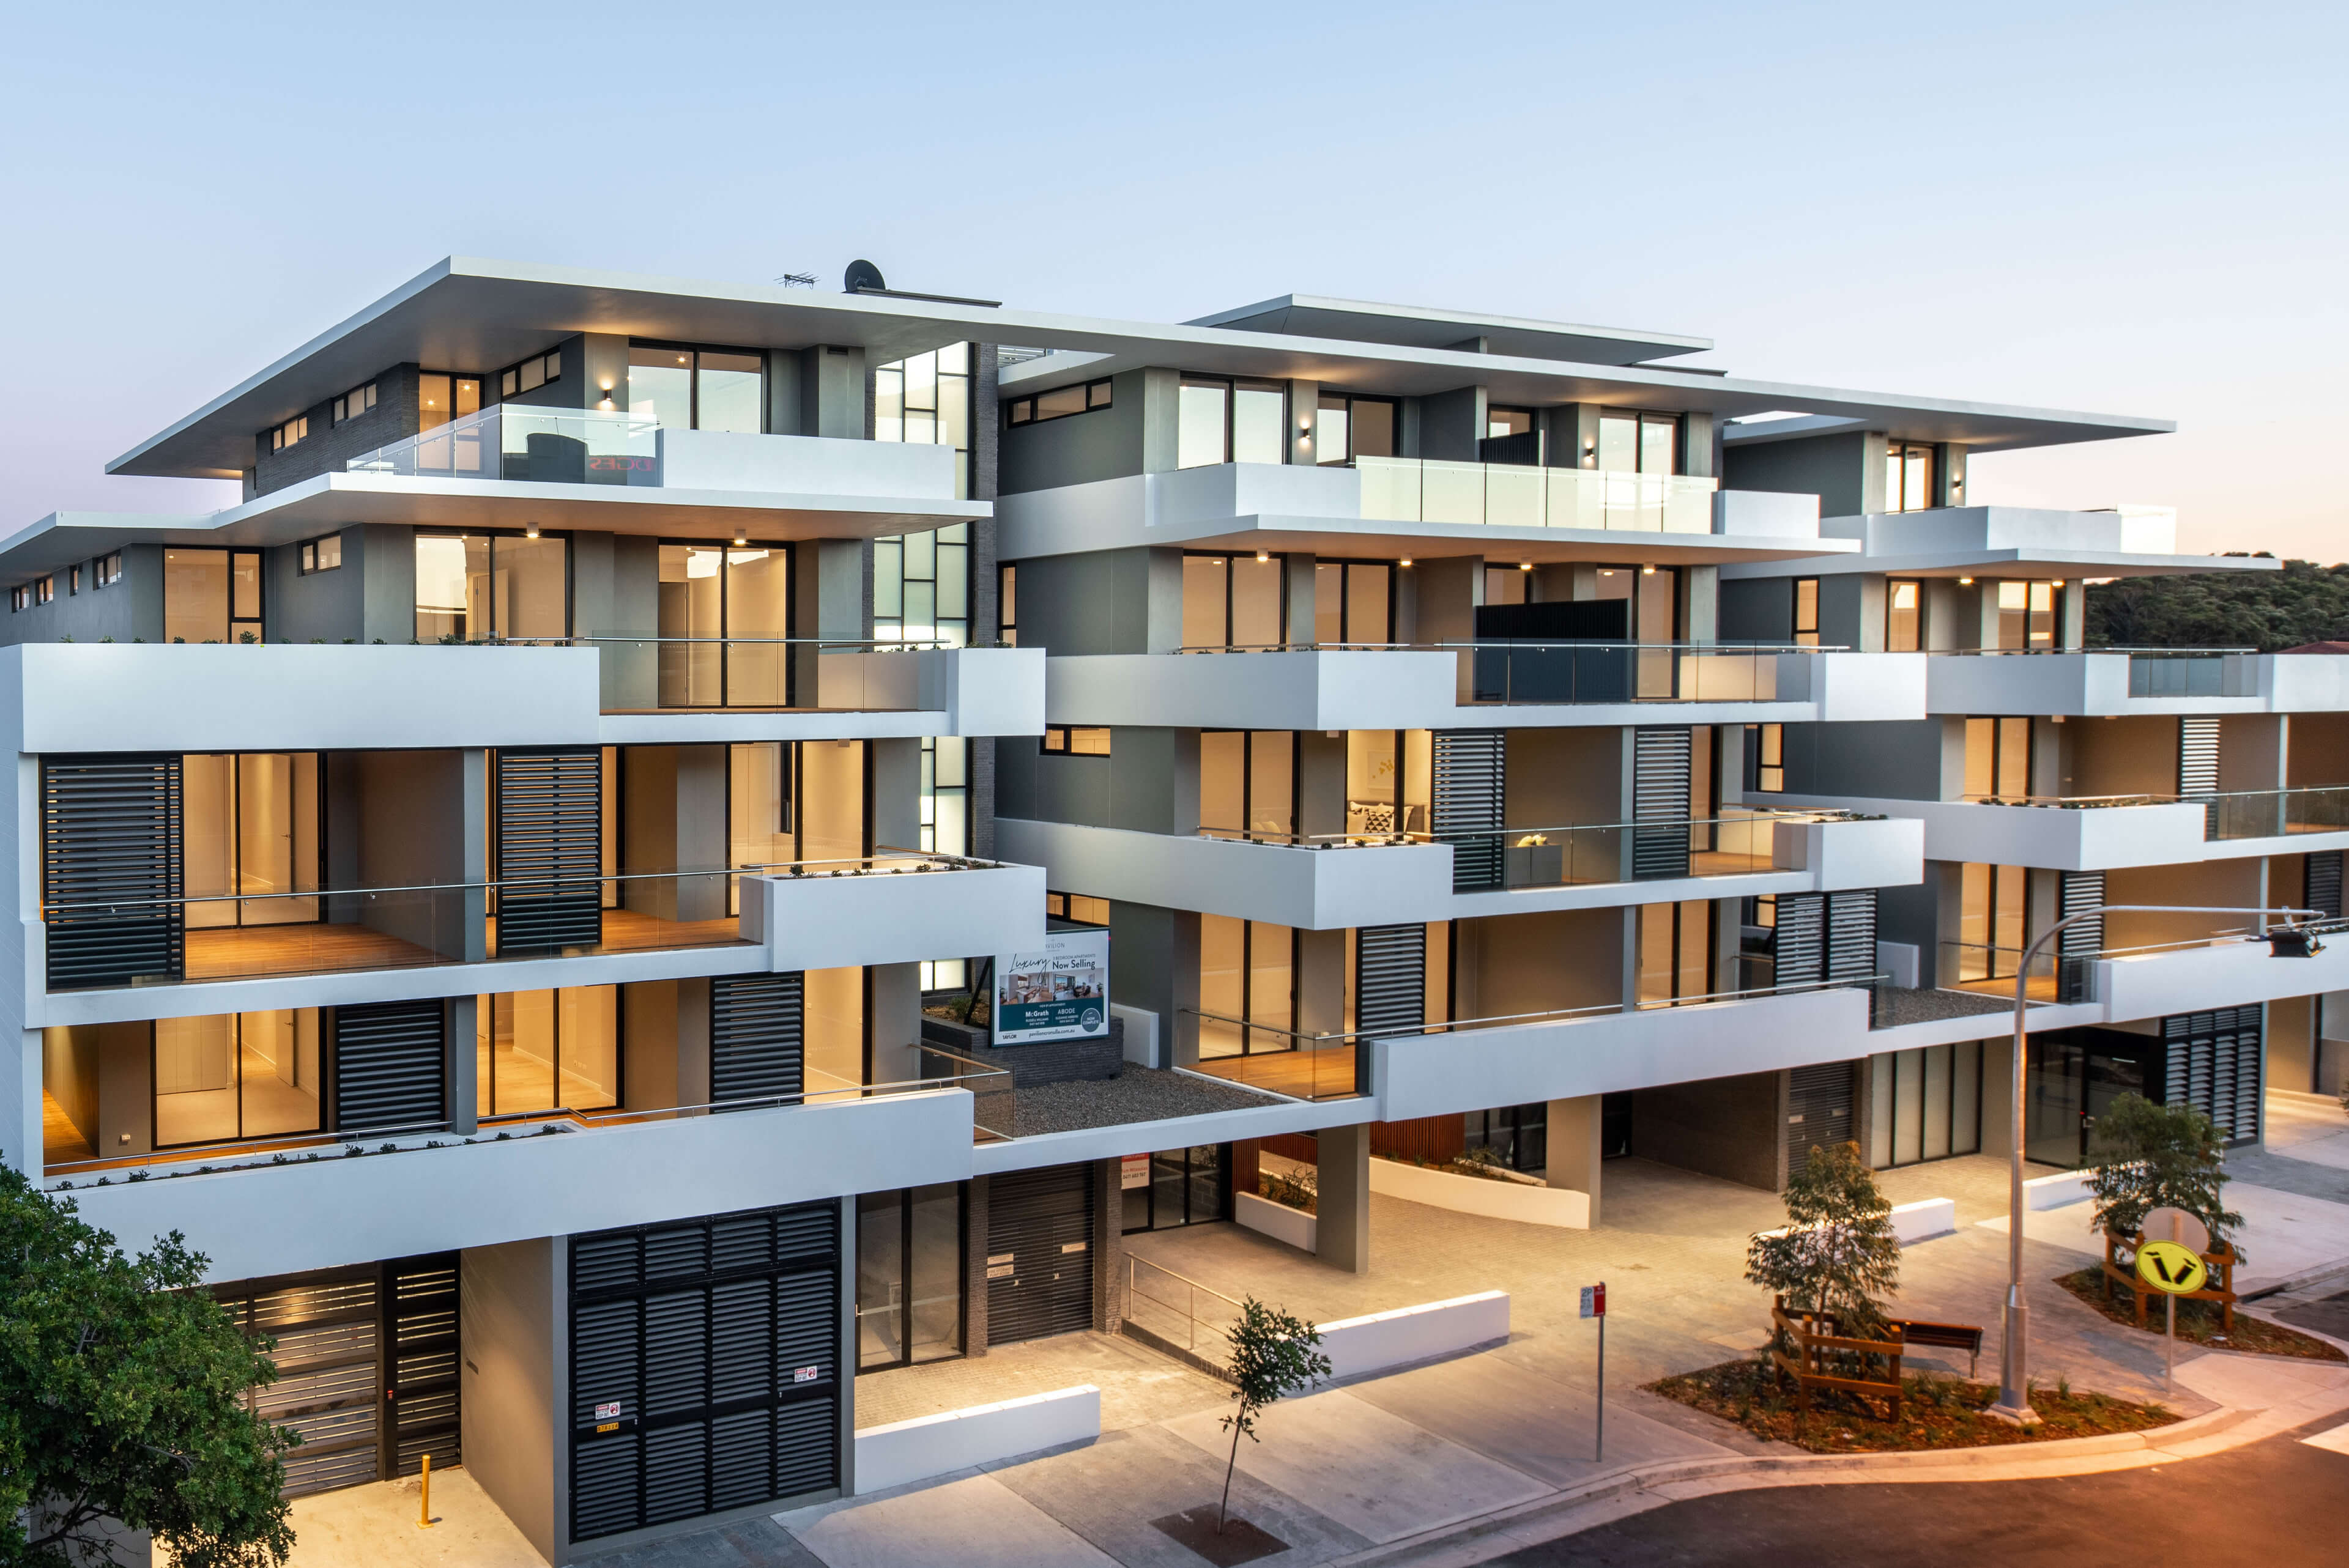 1 exterior day pavilion apartments cronulla taylor construction residential